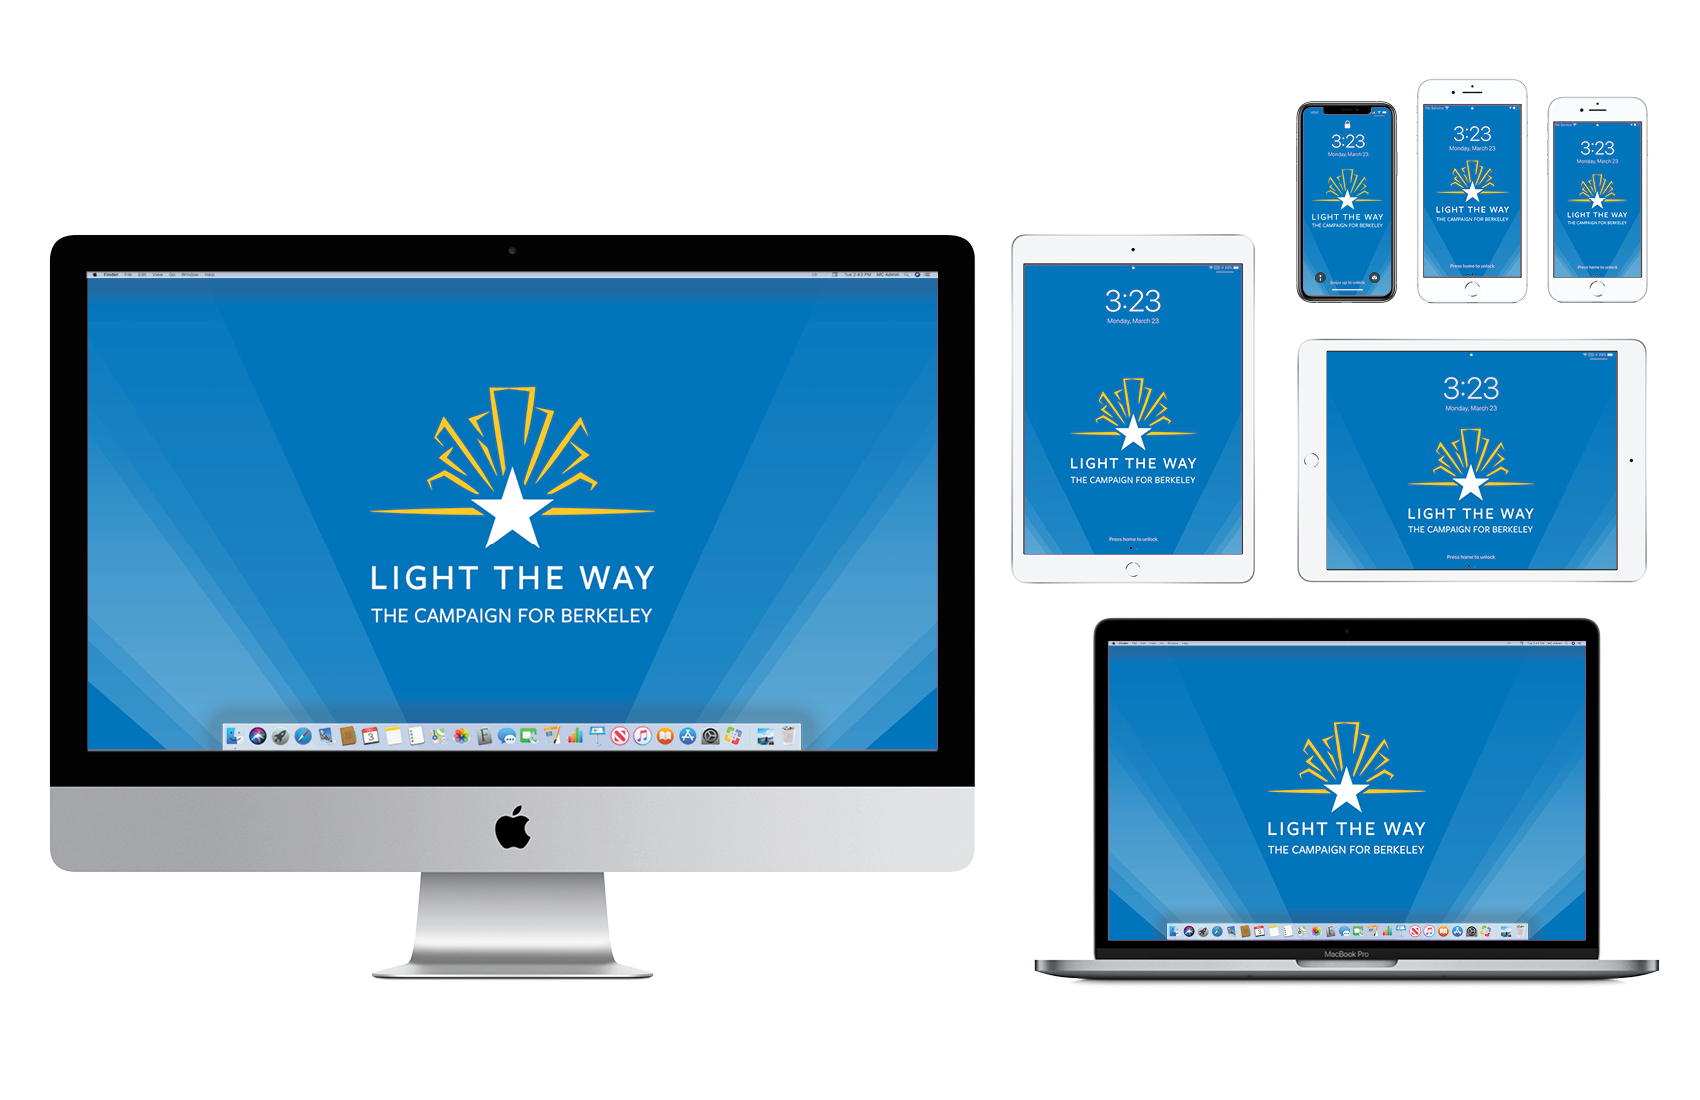 Wallpaper with Light the Way campaign logo on blue background